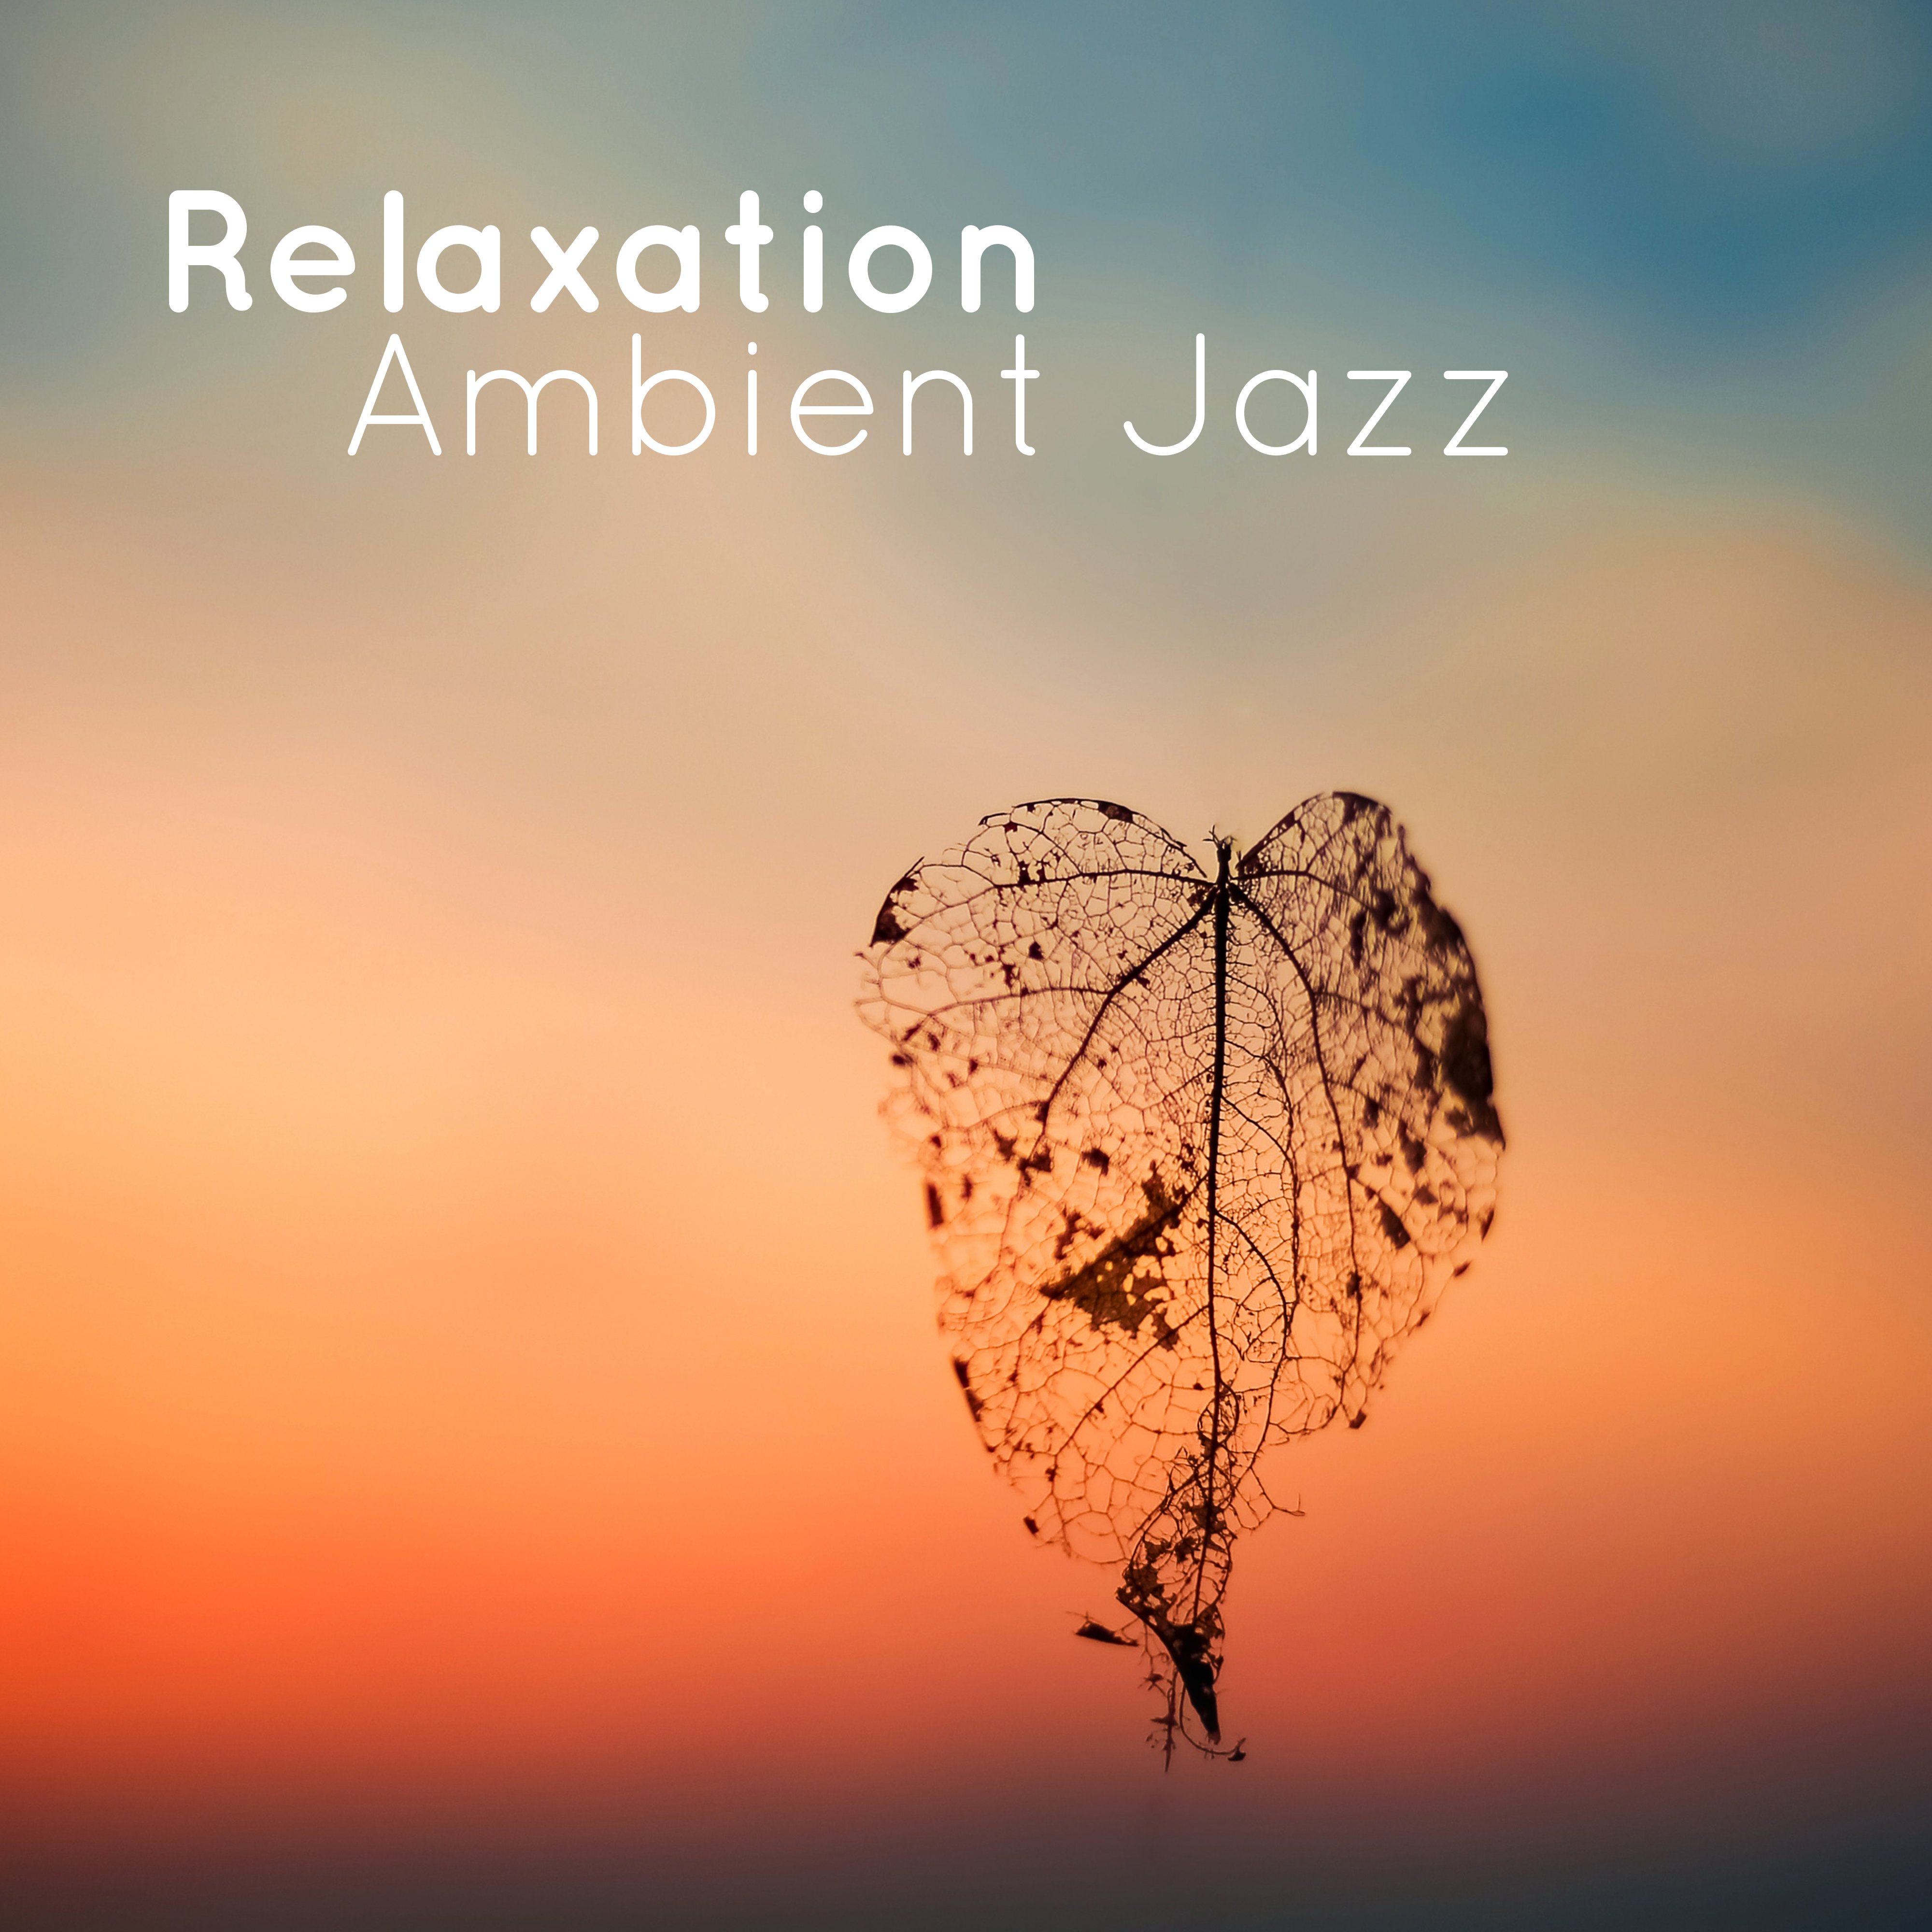 Relaxation Ambient Jazz